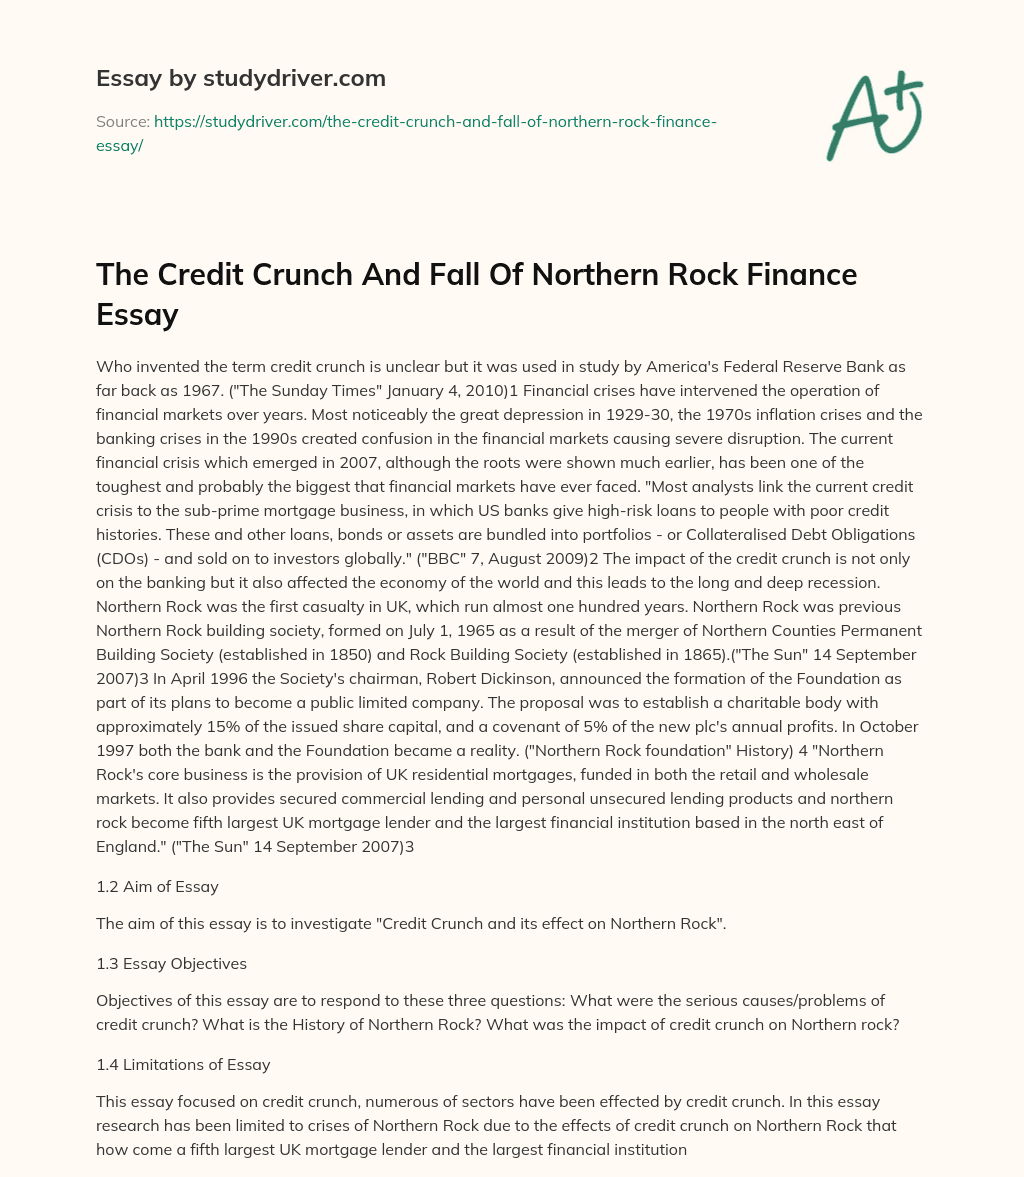 The Credit Crunch and Fall of Northern Rock Finance Essay essay